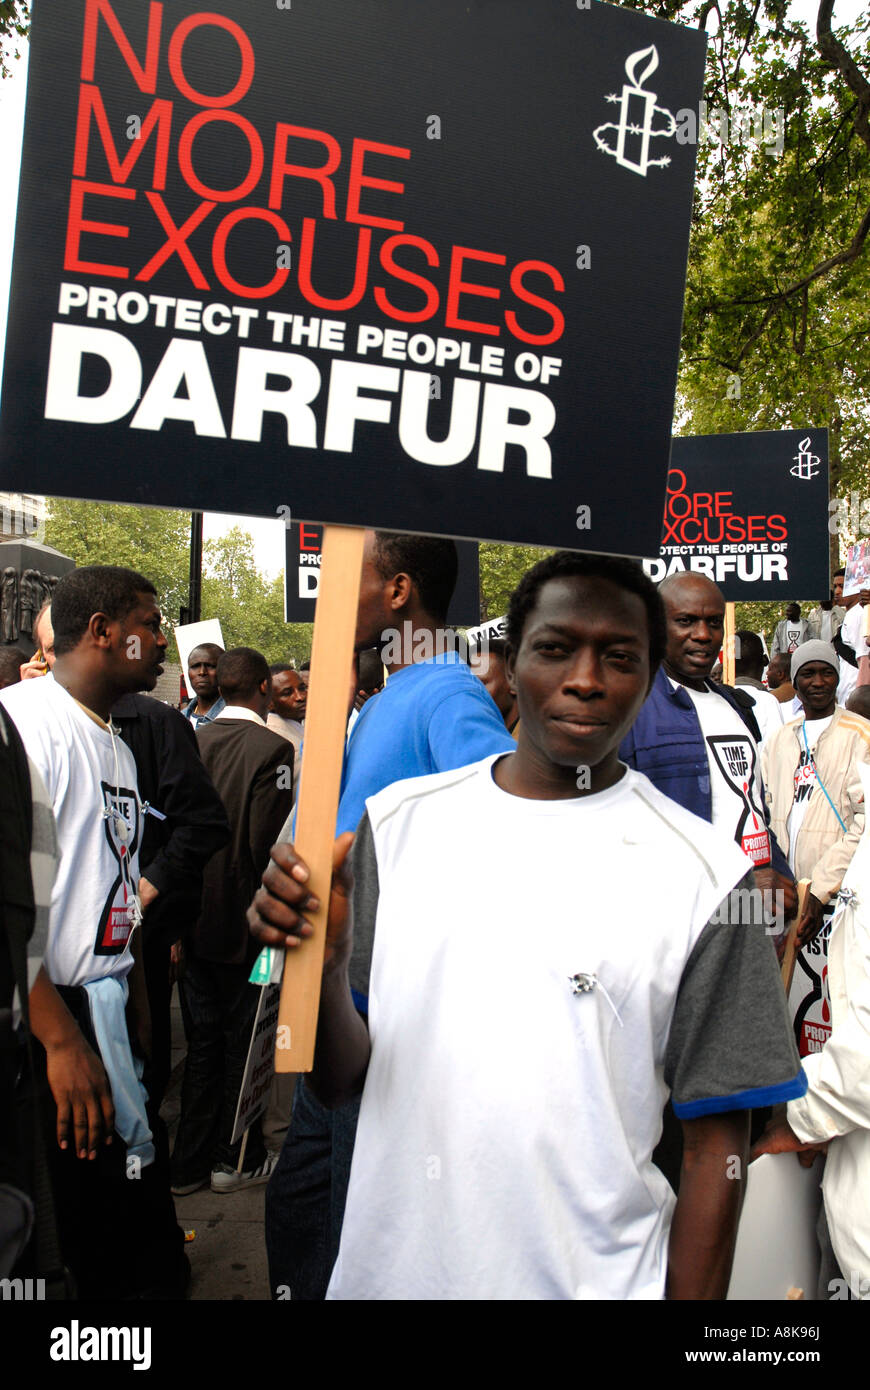 Demonstration to Downing Street London asking for UN peacekeeping force to help in Darfur Sudan. 29.4.07. Stock Photo